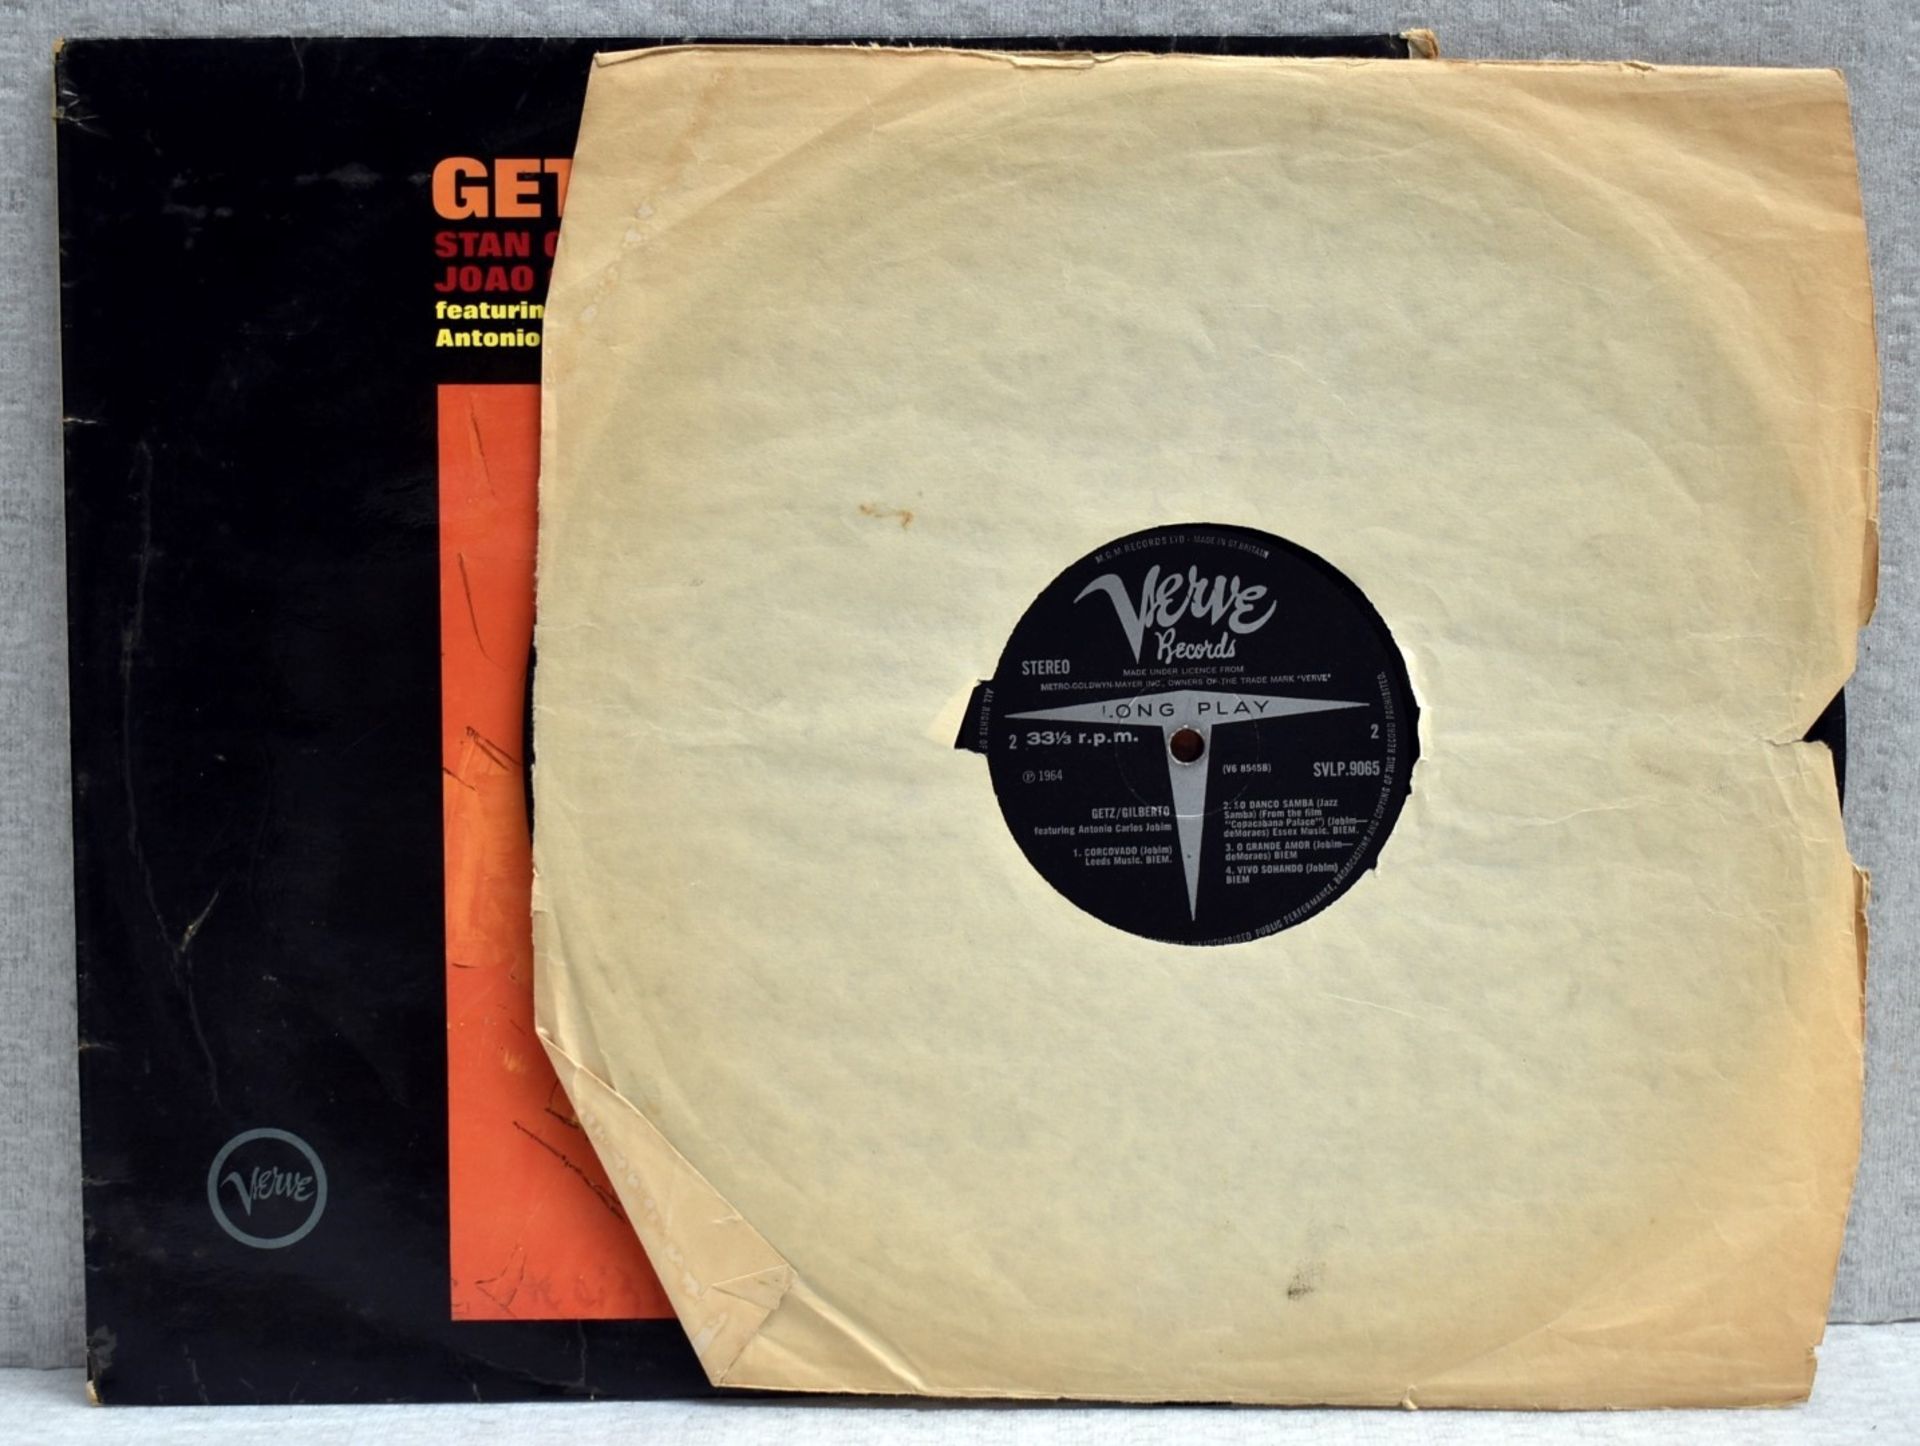 1 x GETZ / GILBERTO by Stan Getz and Joao Gilberto VERVE Records 1964 2 Sided 12 Inch Vynil - Ref: - Image 12 of 15